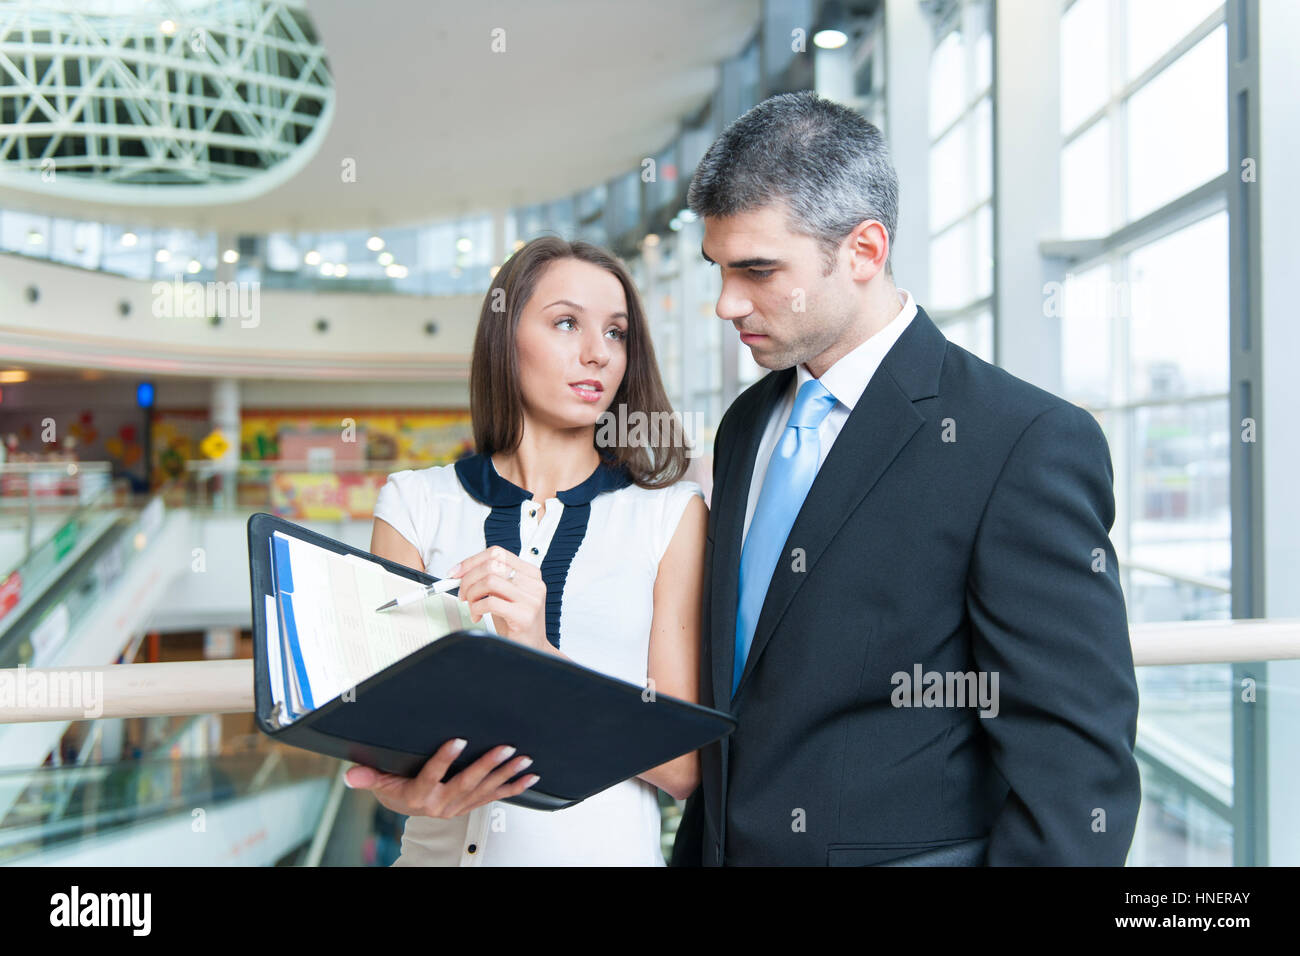 Businessman and woman discussing work Stock Photo